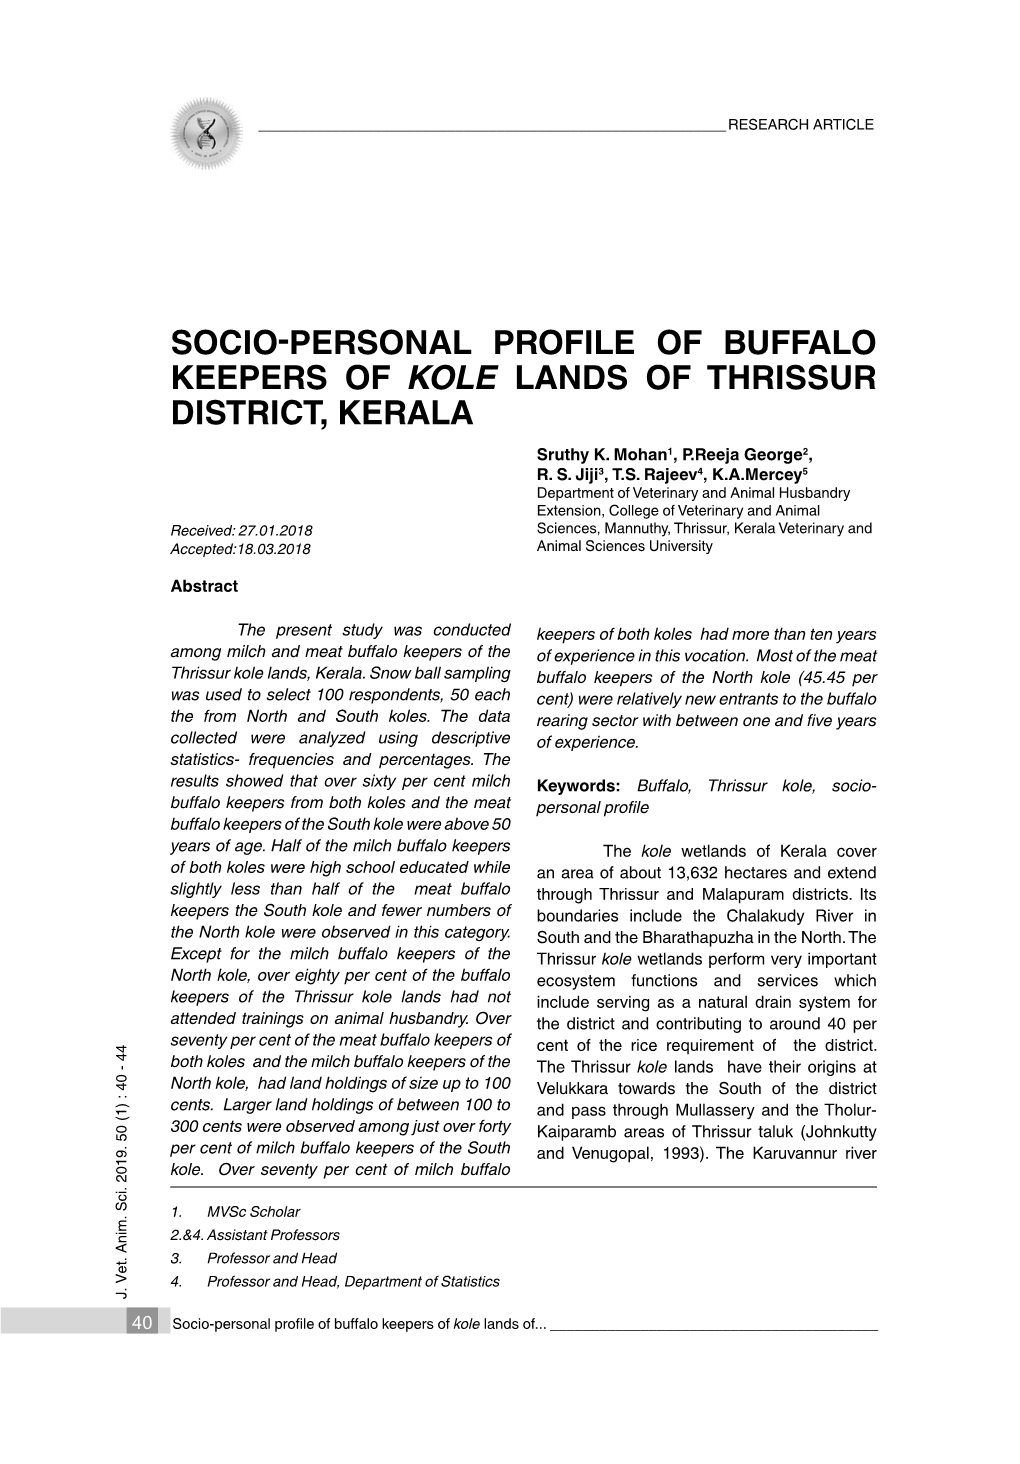 8. Socio-Personal Profile of Buffalo Keepers of Kole Lands of Thrissur